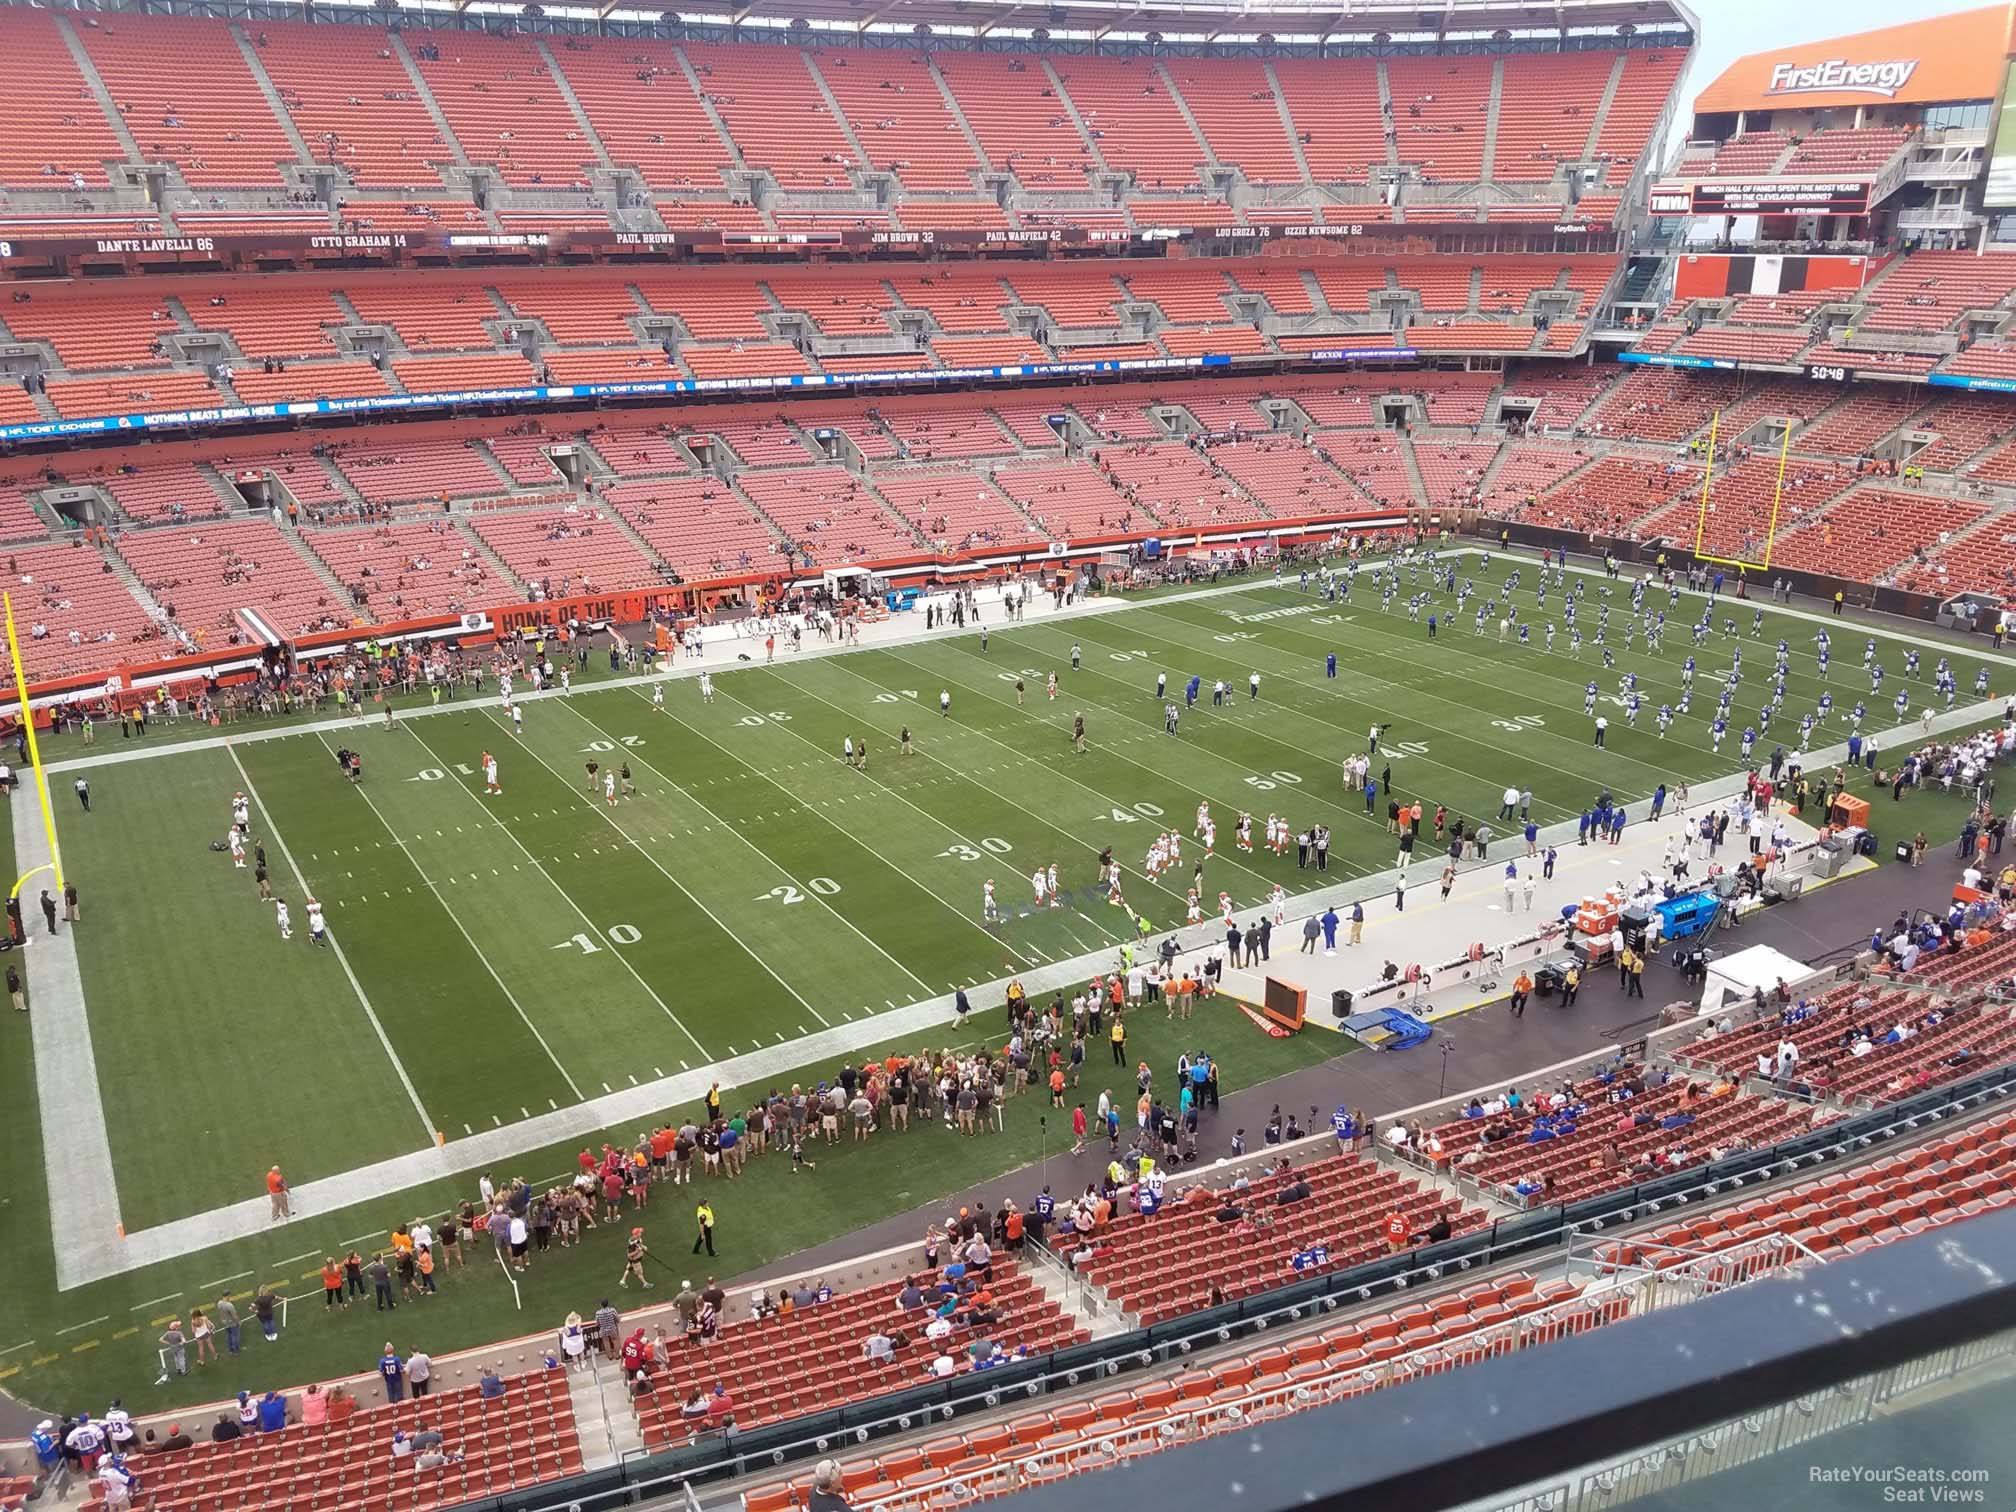 section 504, row 2 seat view  - cleveland browns stadium